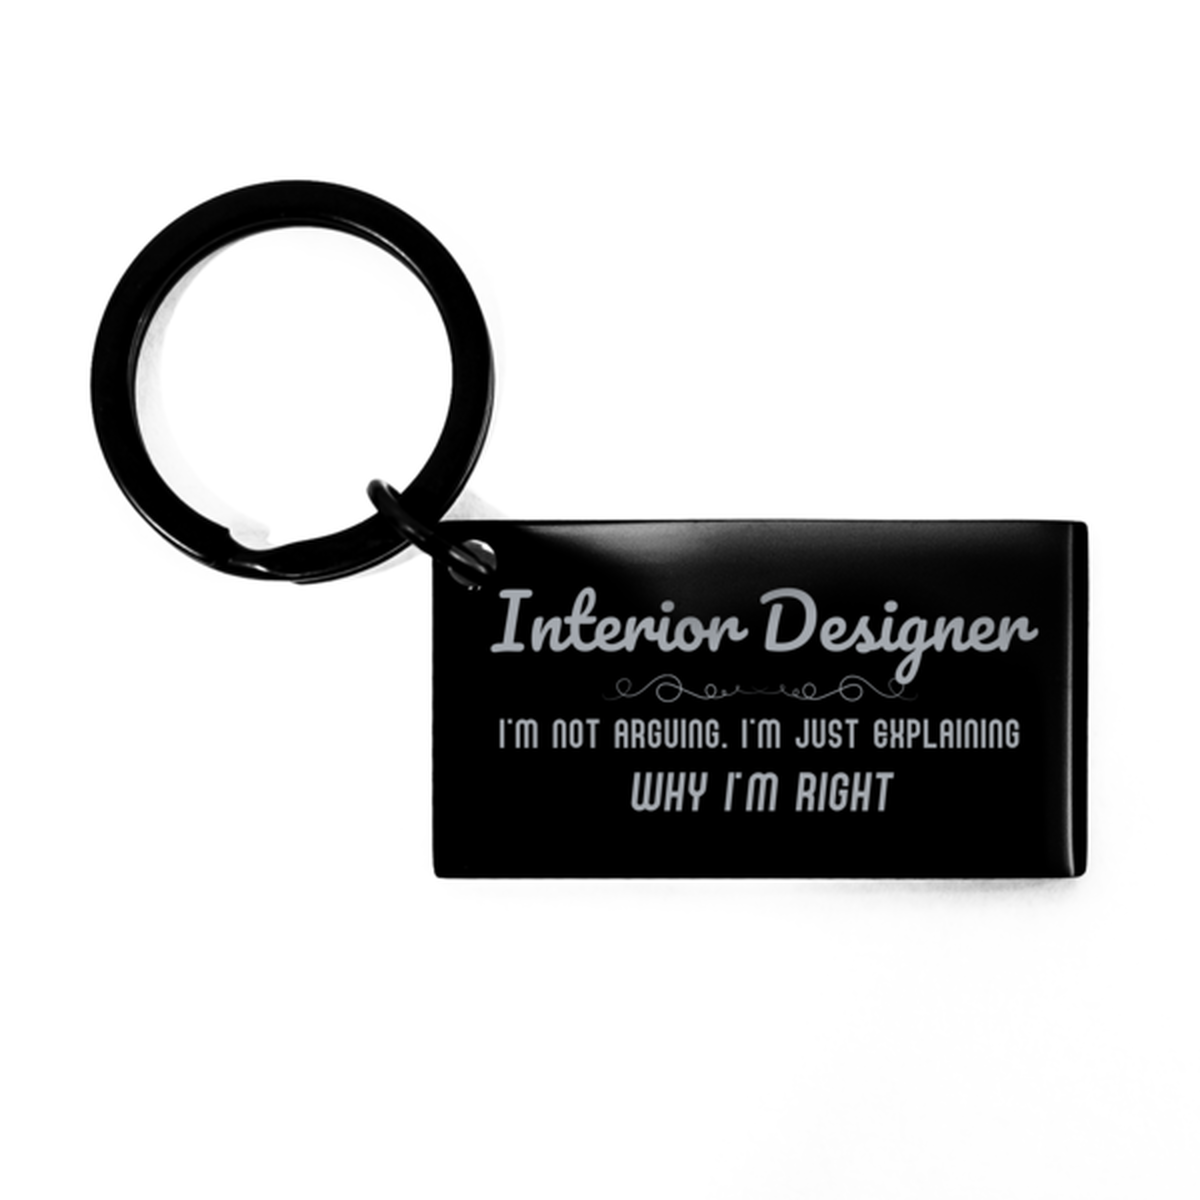 Interior Designer I'm not Arguing. I'm Just Explaining Why I'm RIGHT Keychain, Funny Saying Quote Interior Designer Gifts For Interior Designer Graduation Birthday Christmas Gifts for Men Women Coworker